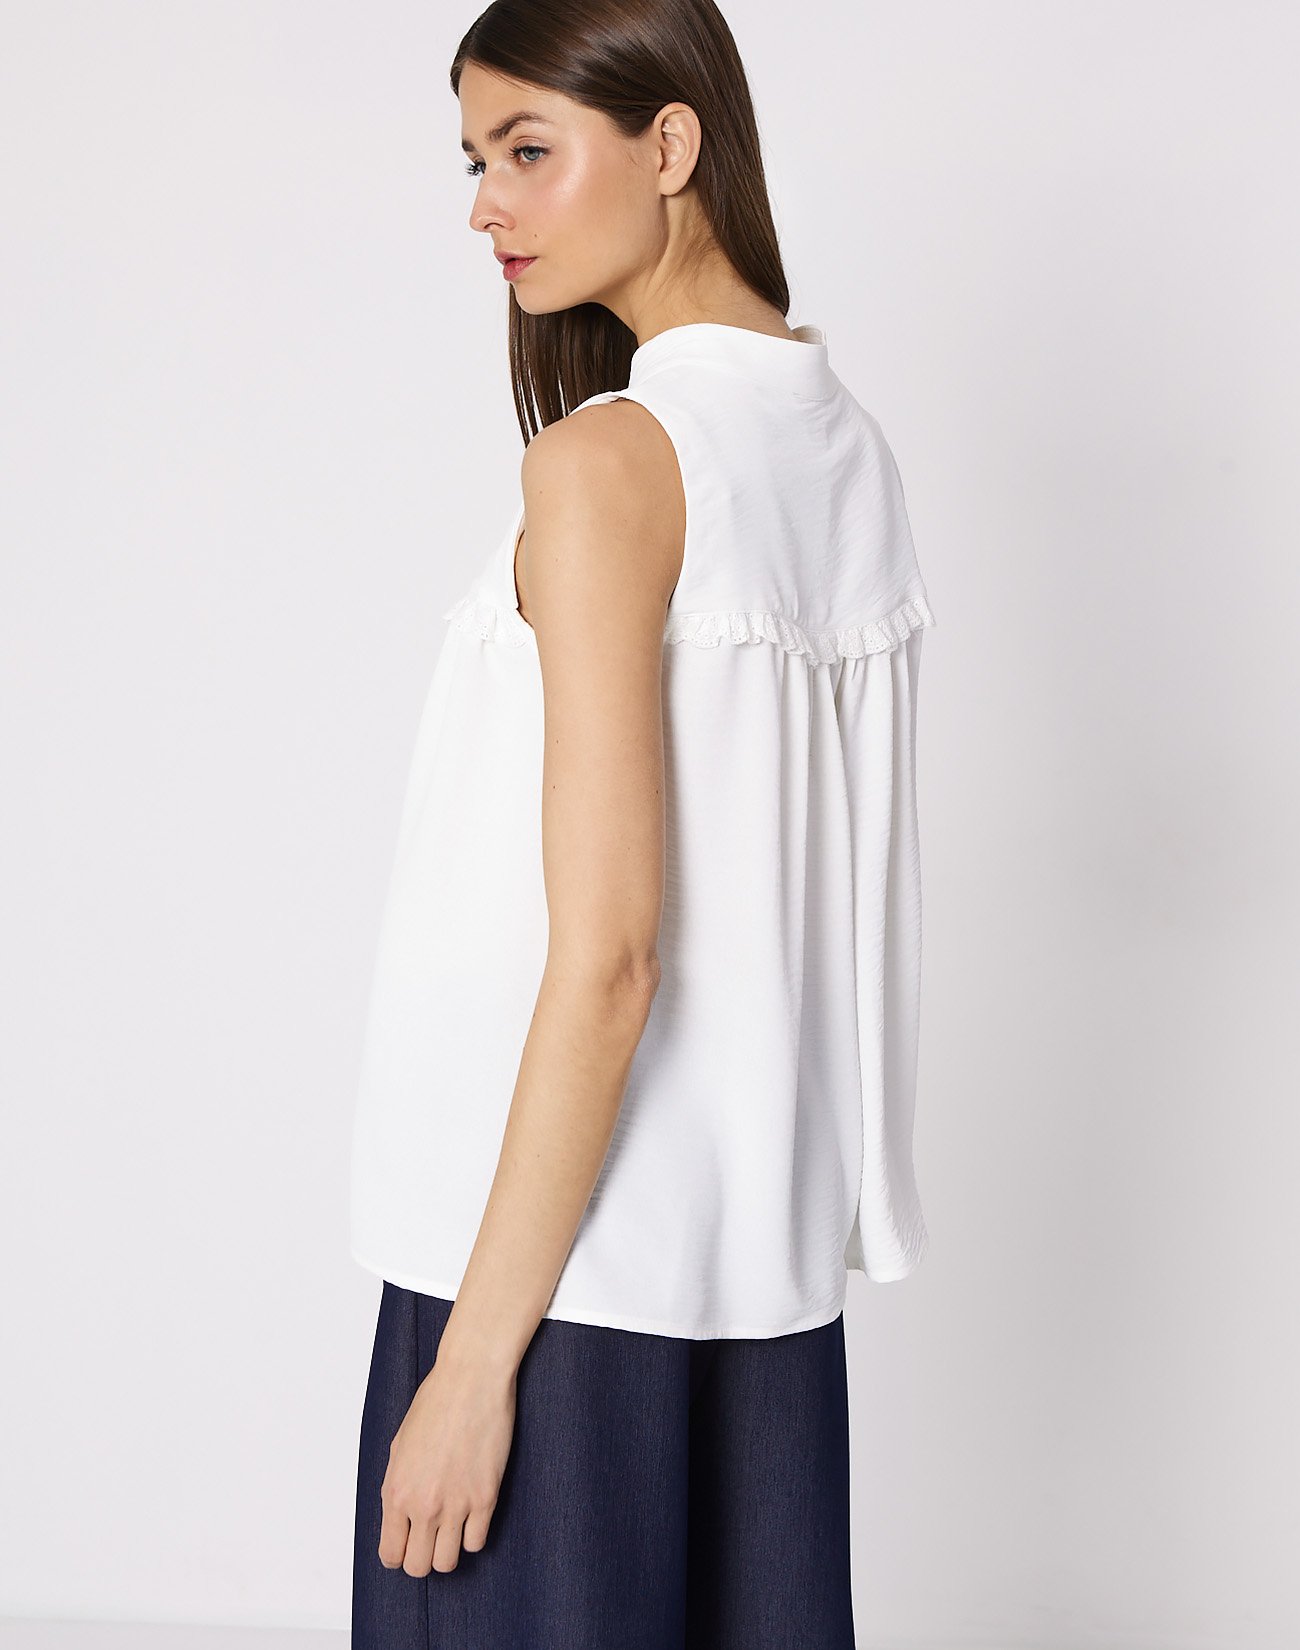 Sleeveless top with lace